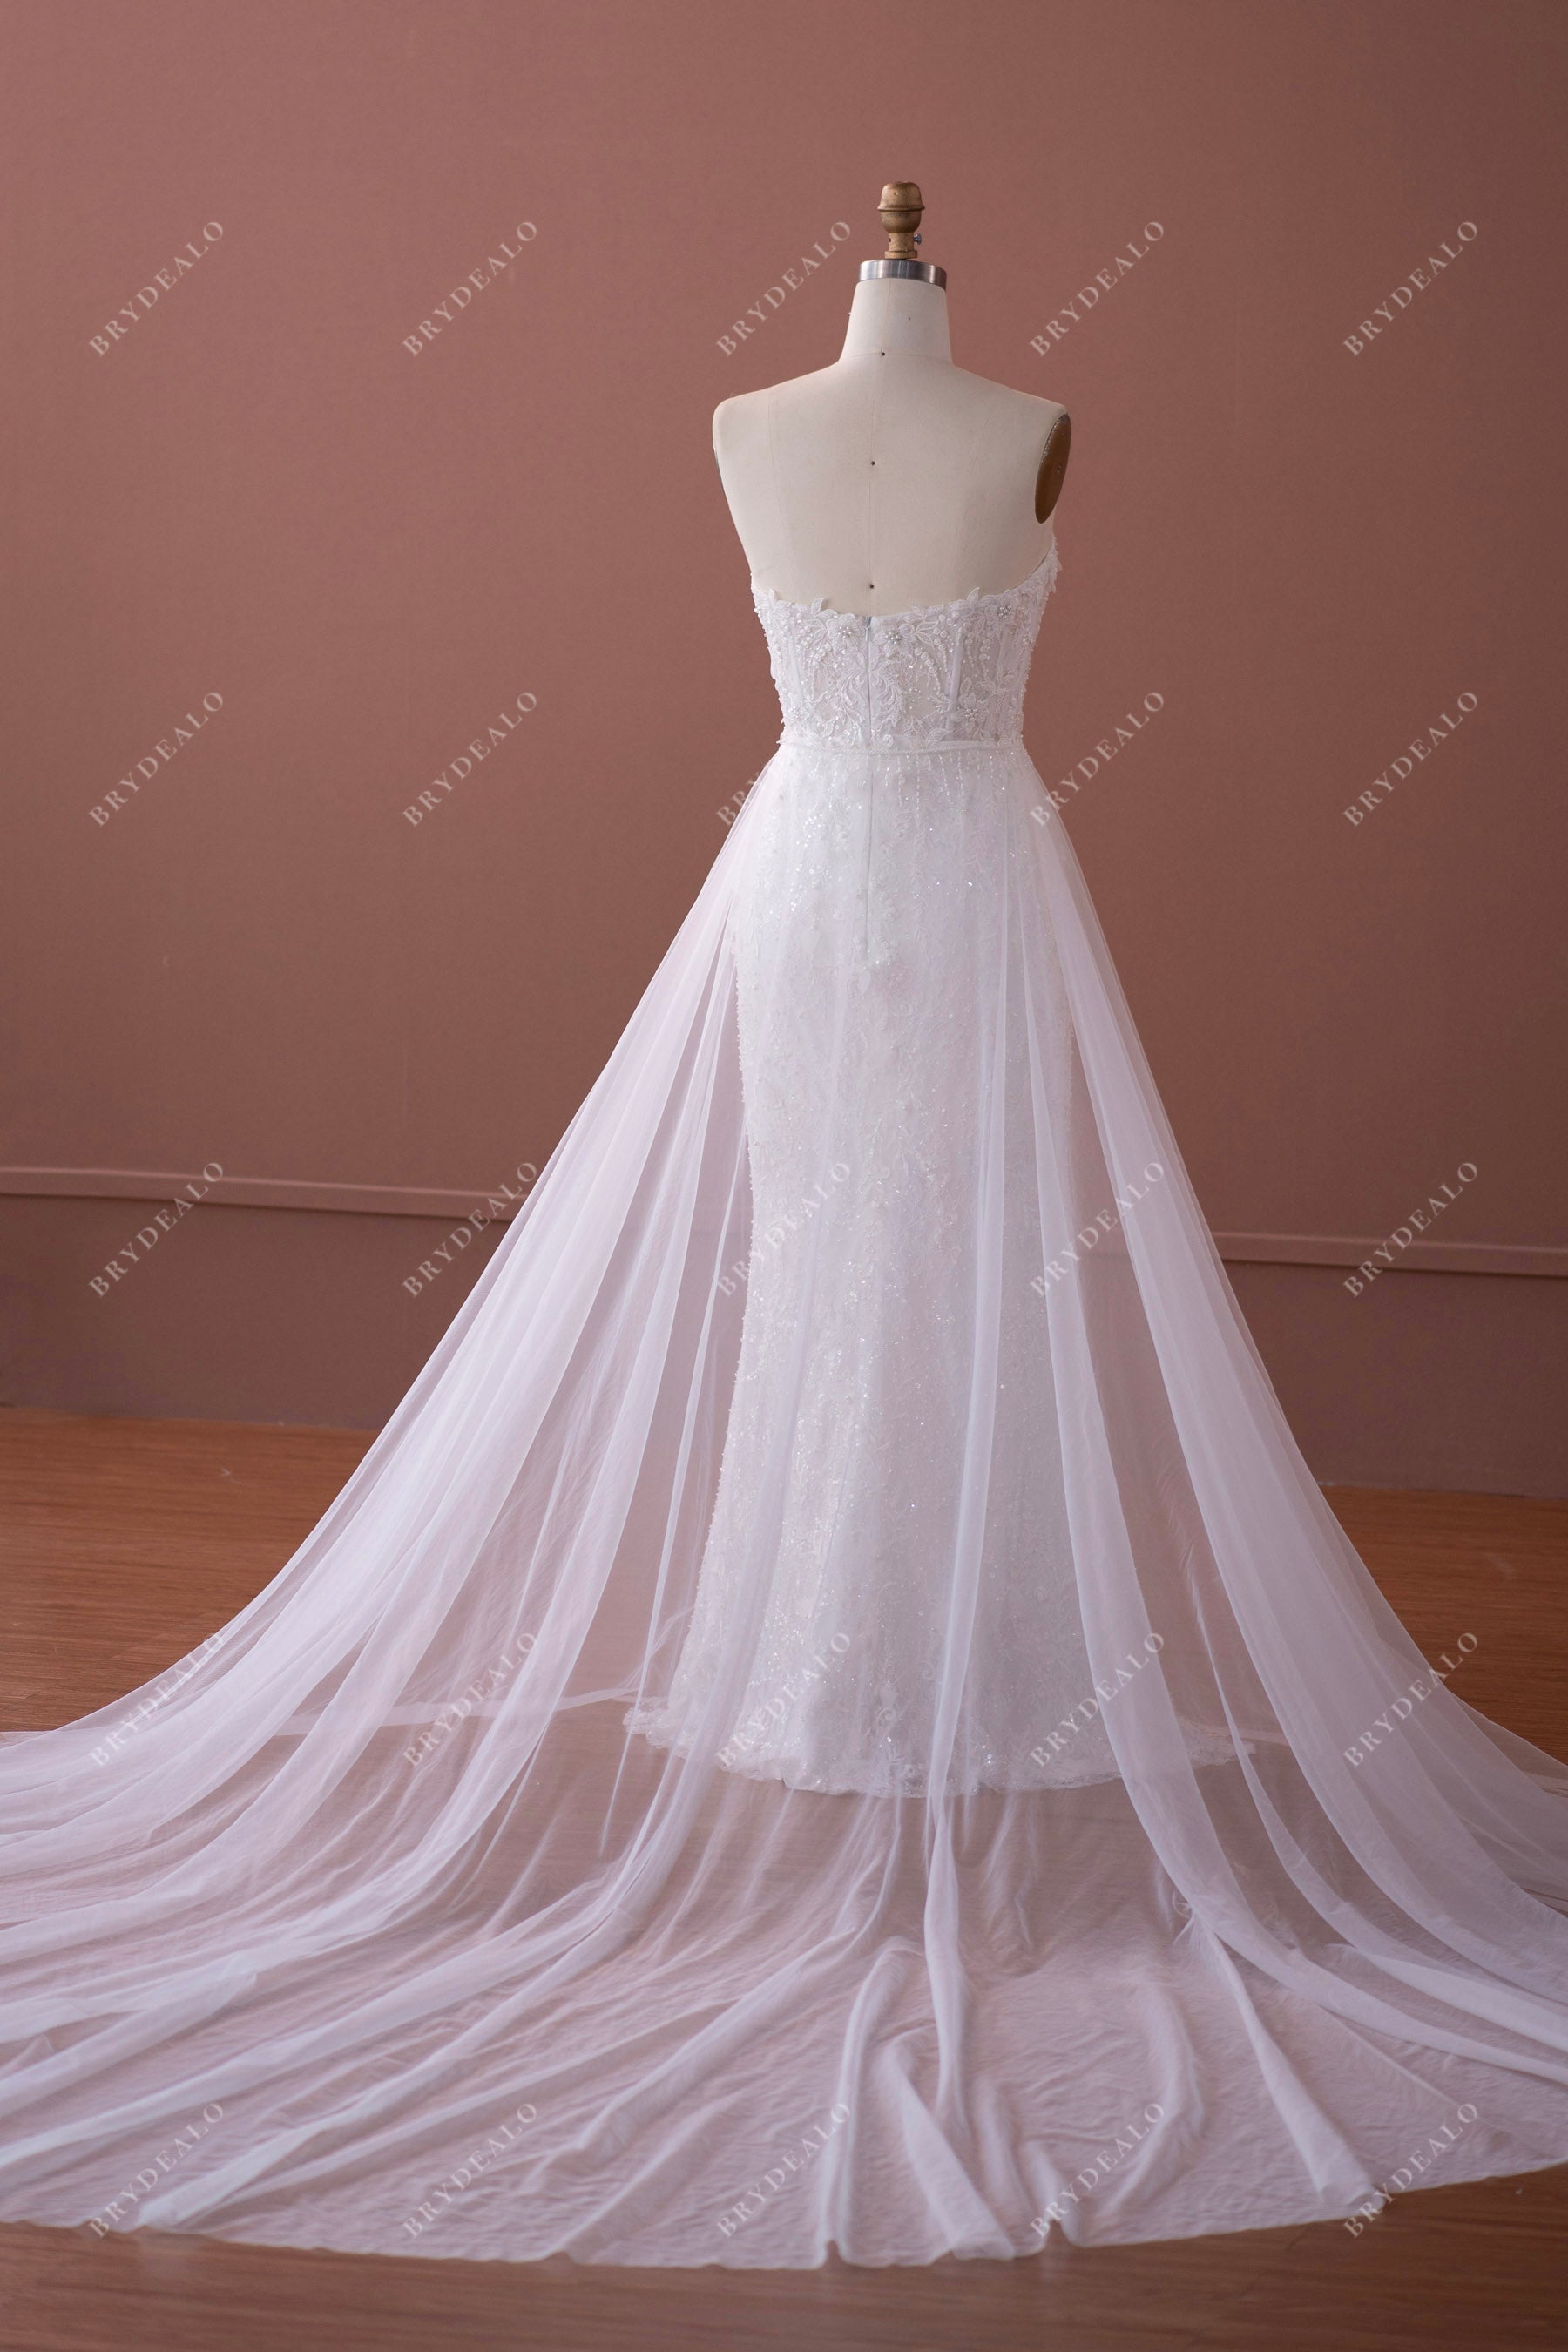 3D flower lace wedding dress with beaded tulle overskirt